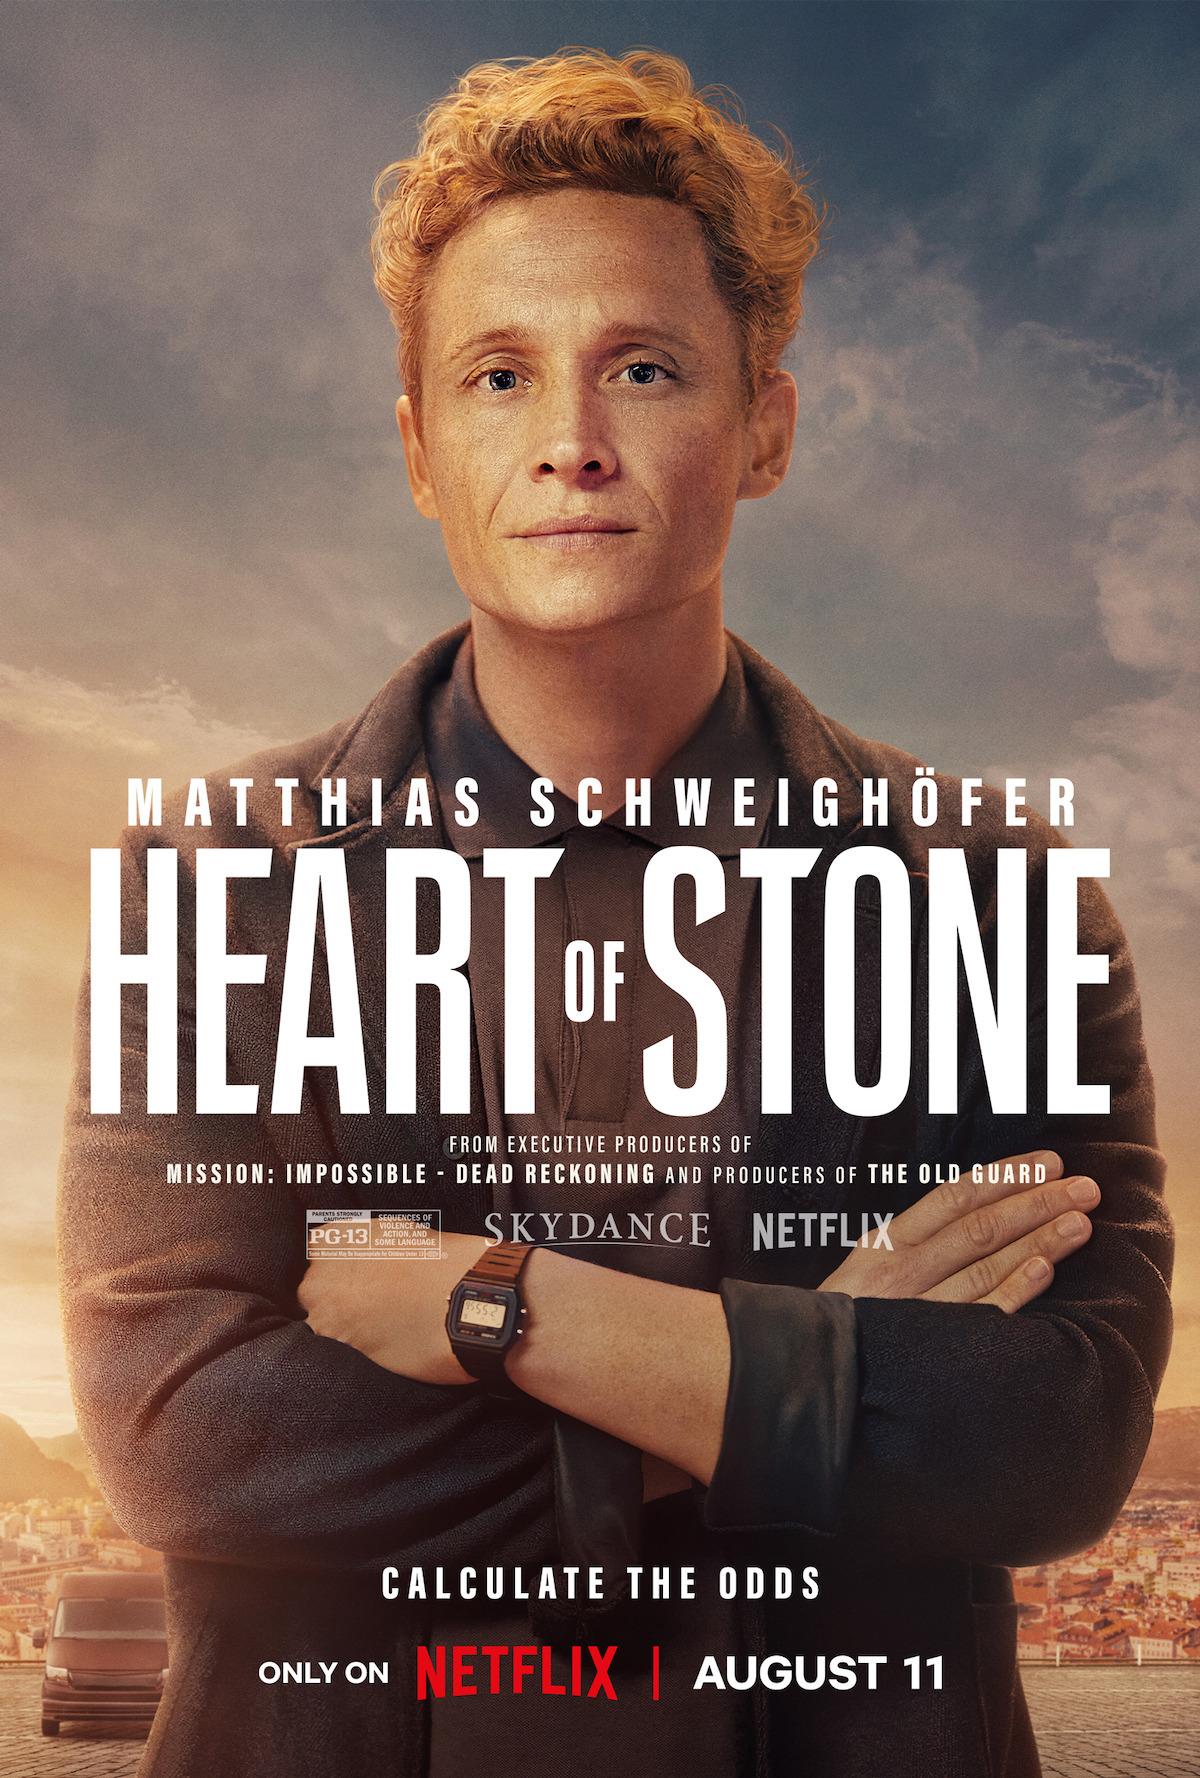 Heart of Stone Cast, News, Videos and more